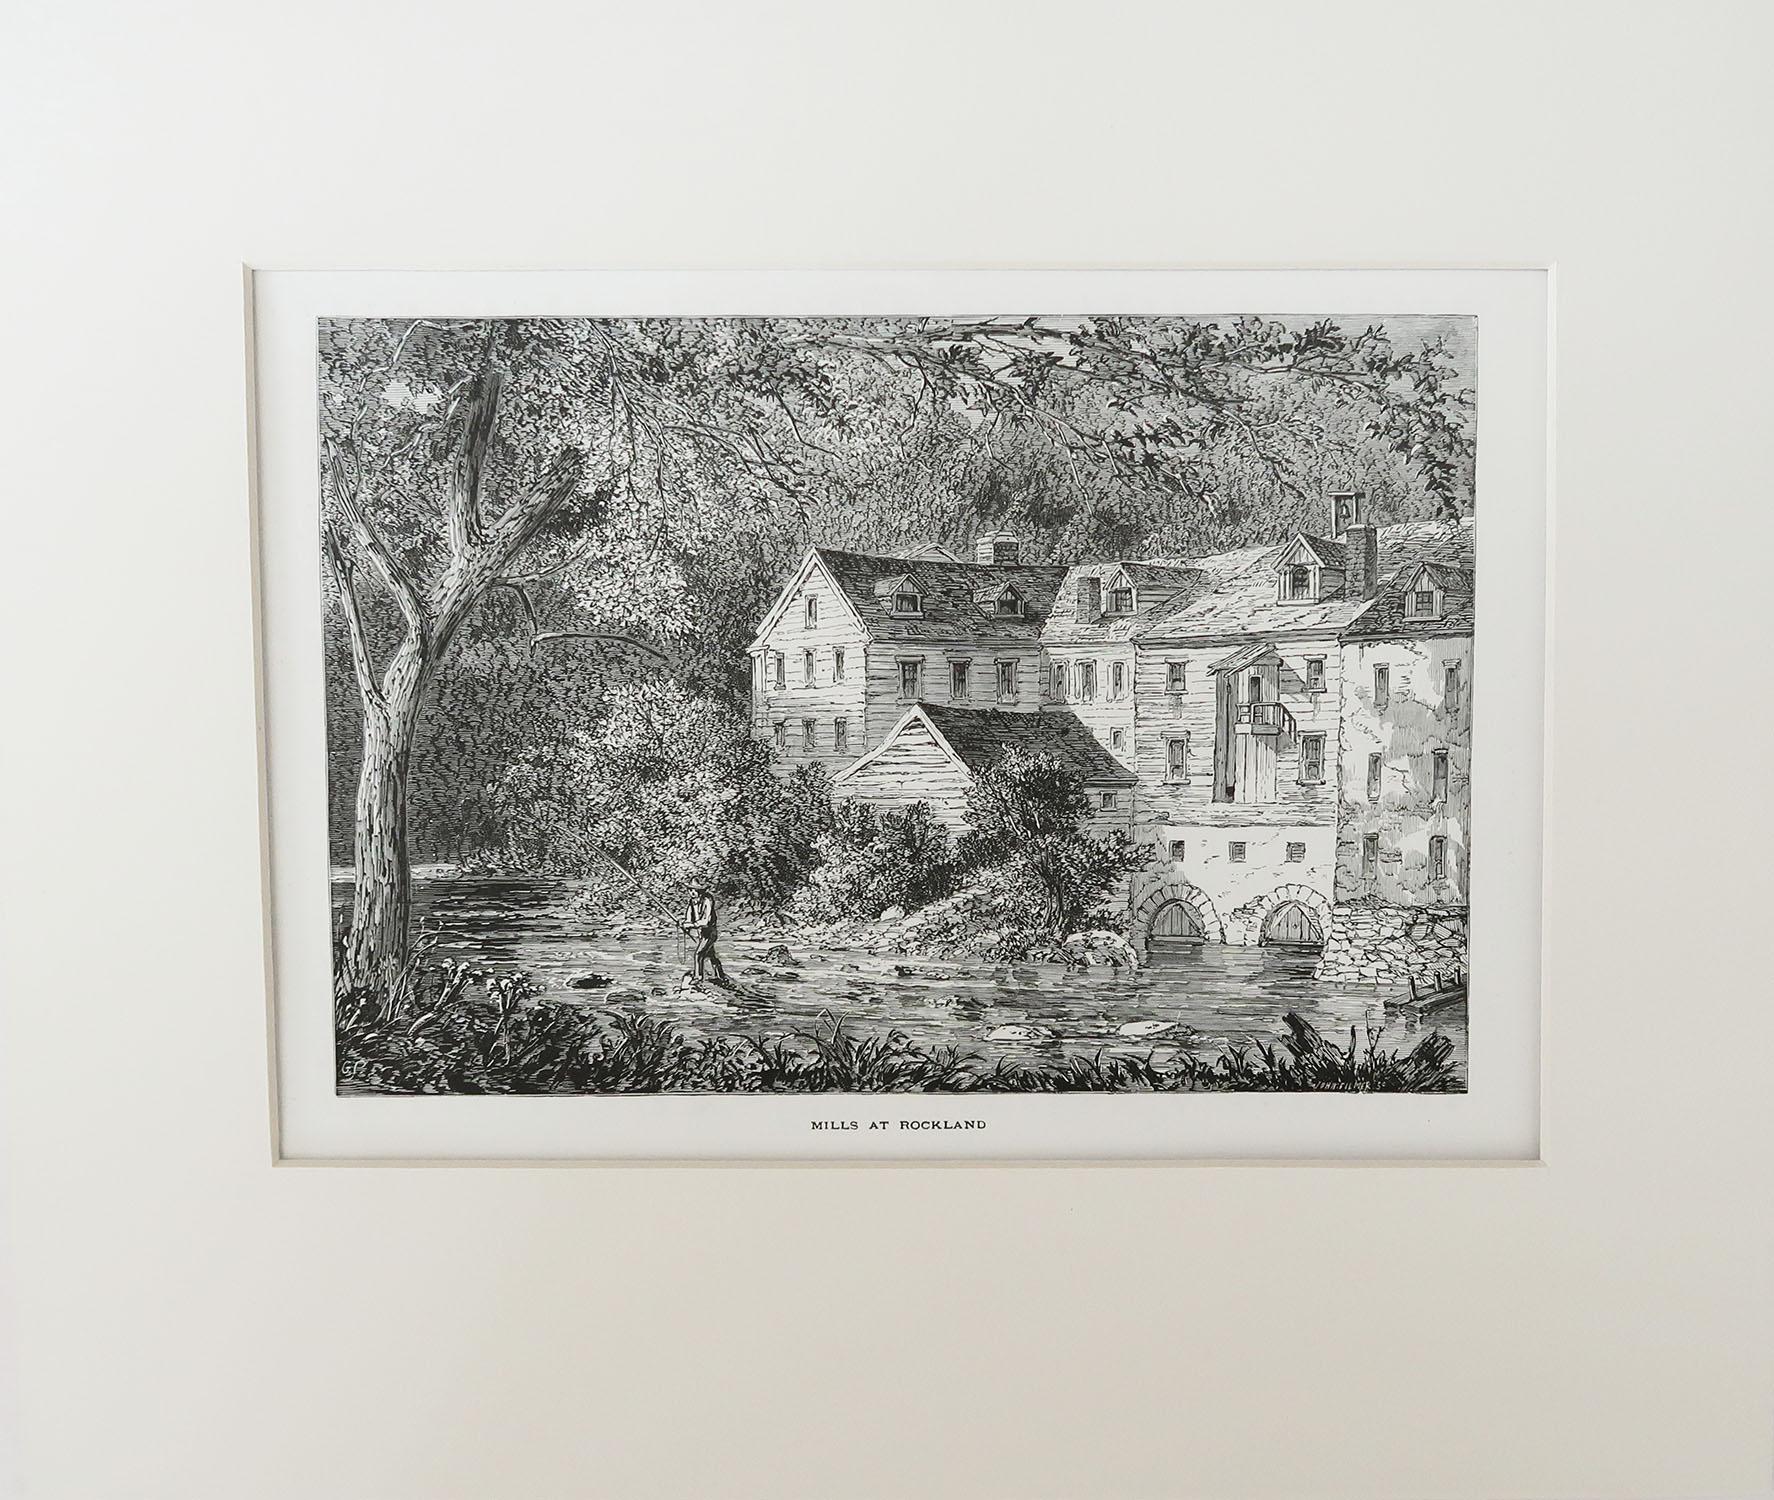 Great print of Rockland Mills

Wood-cut engraving after the drawing by Harry Fenn

Published circa 1870

Matted or mounted in cream card

Unframed

The measurement below is the size of the card.
 